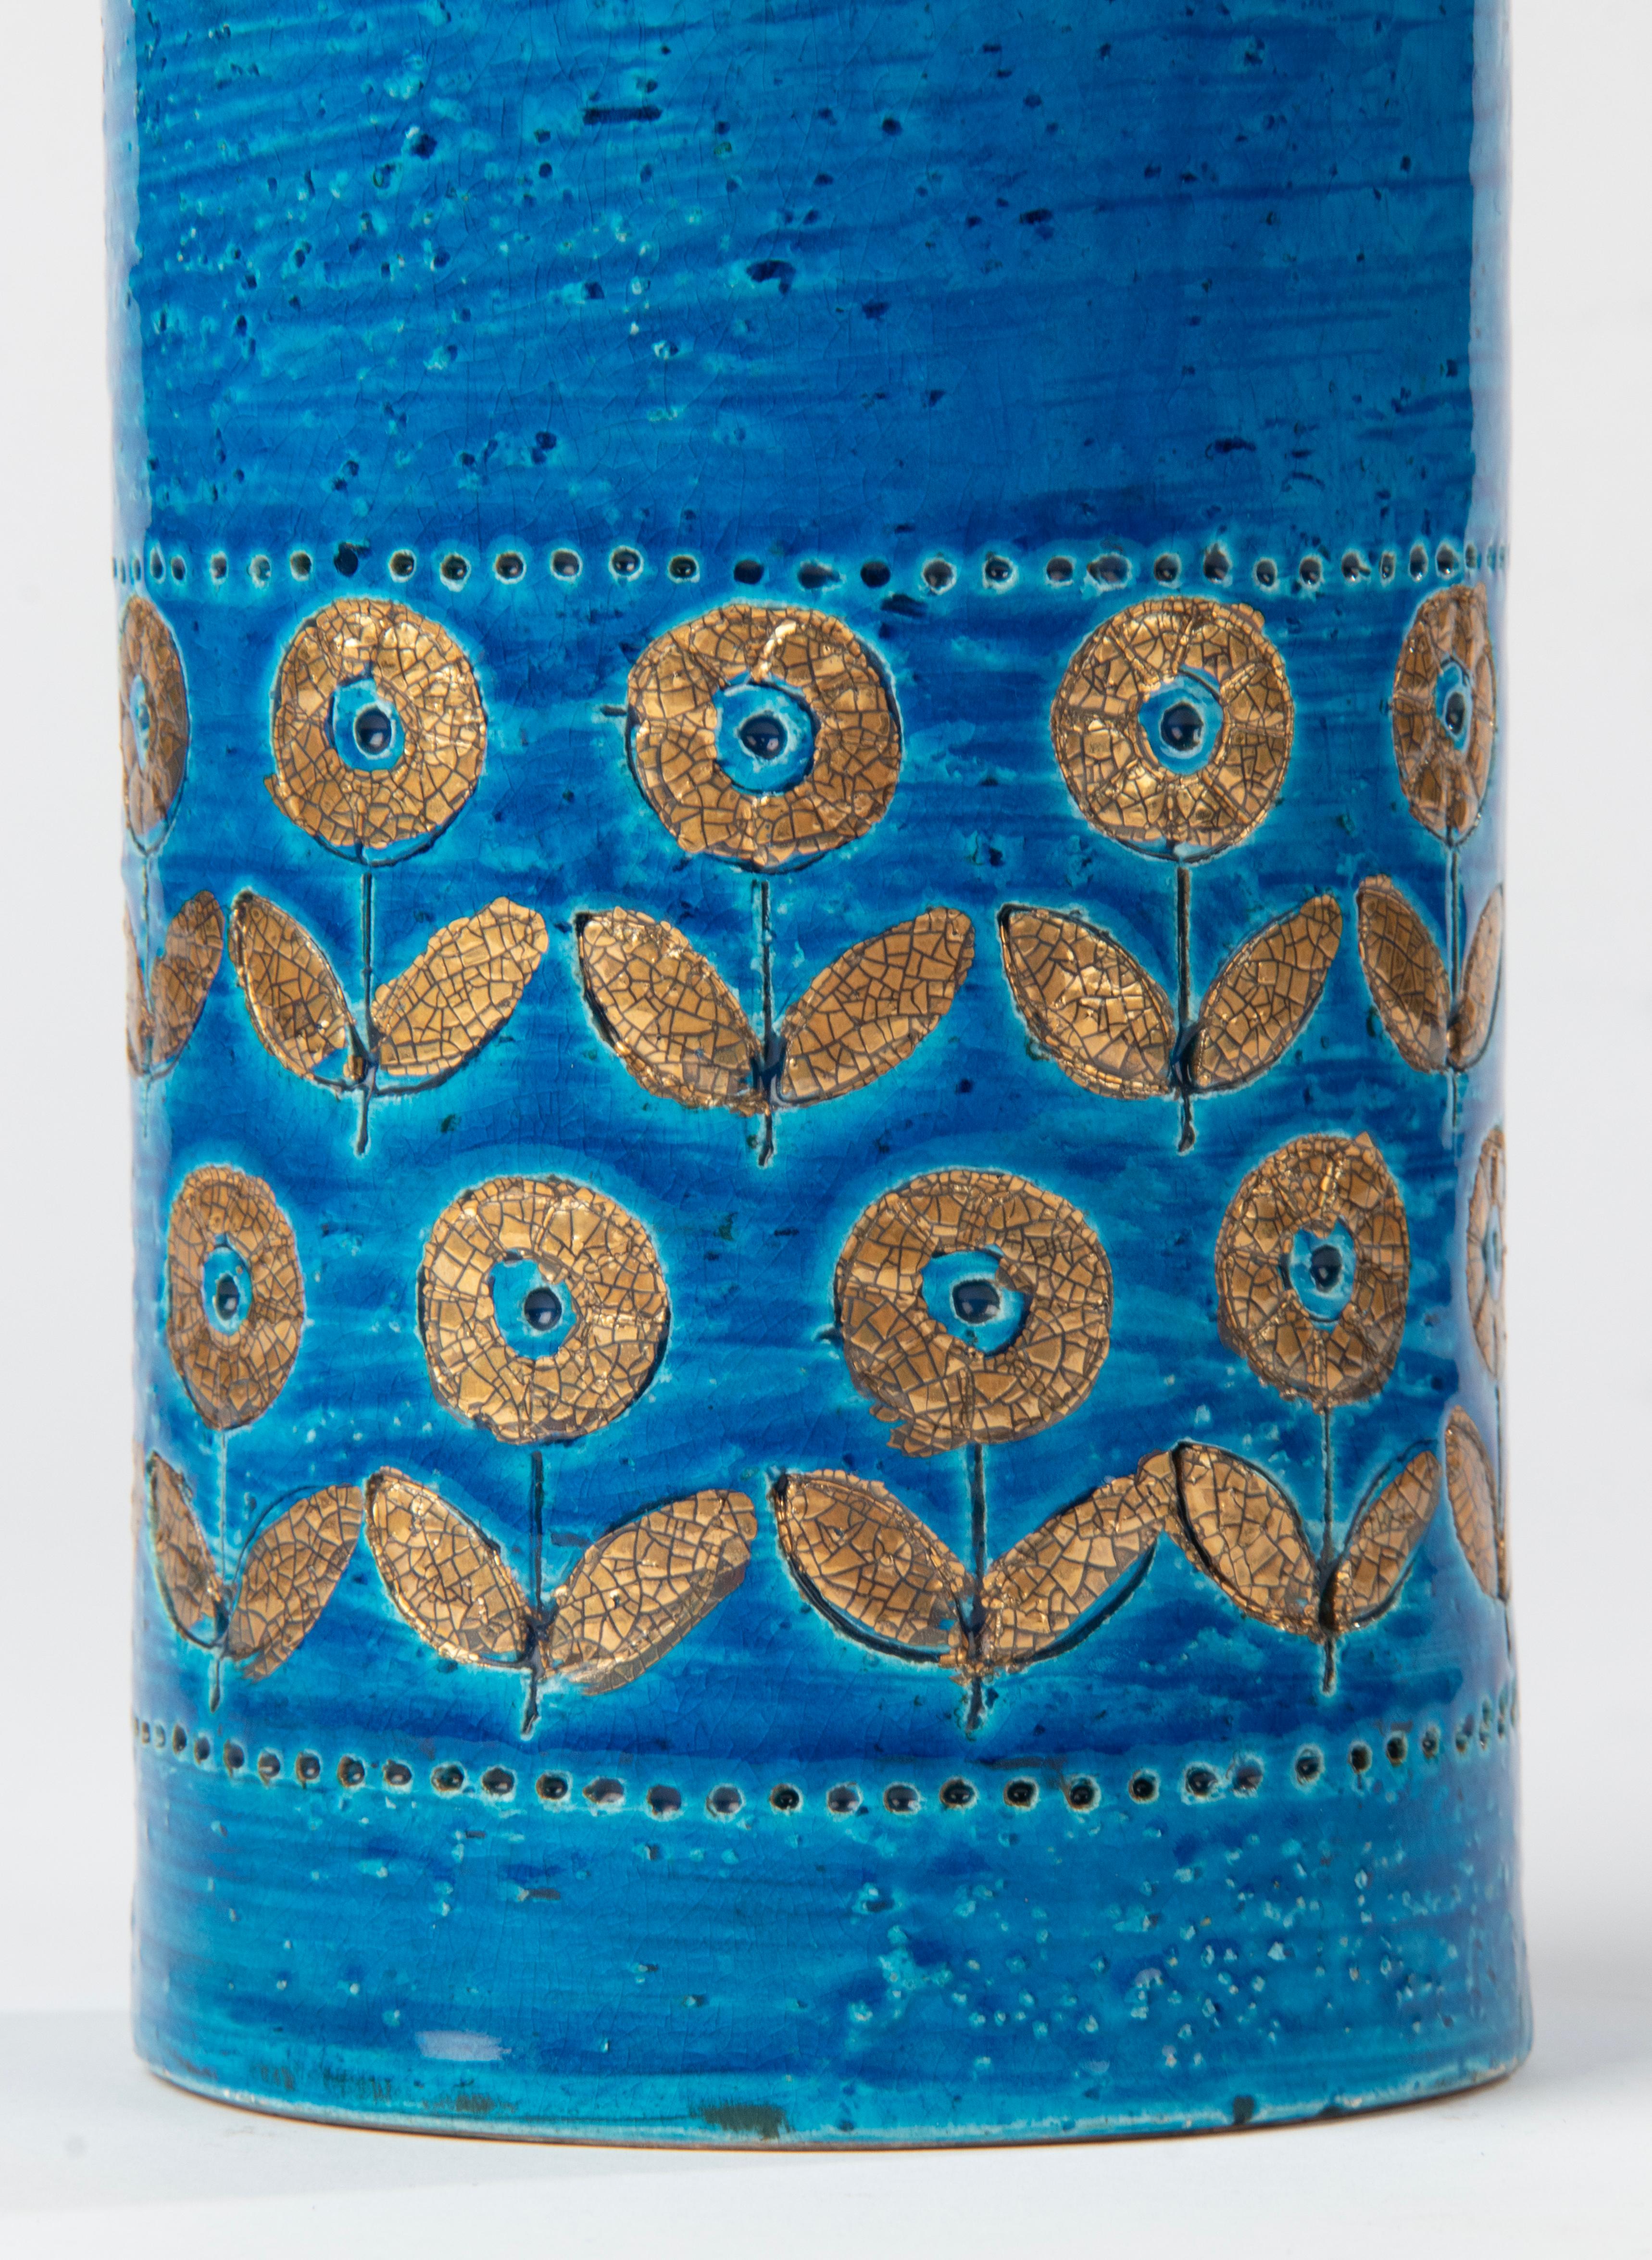 A beautiful ceramic vase, attributed to the Italian maker Bitossi. The vase is not marked. The blue color, shape and structure are characteristic of Bistossi.
The vase is in good condition. No chips and no hairlines.